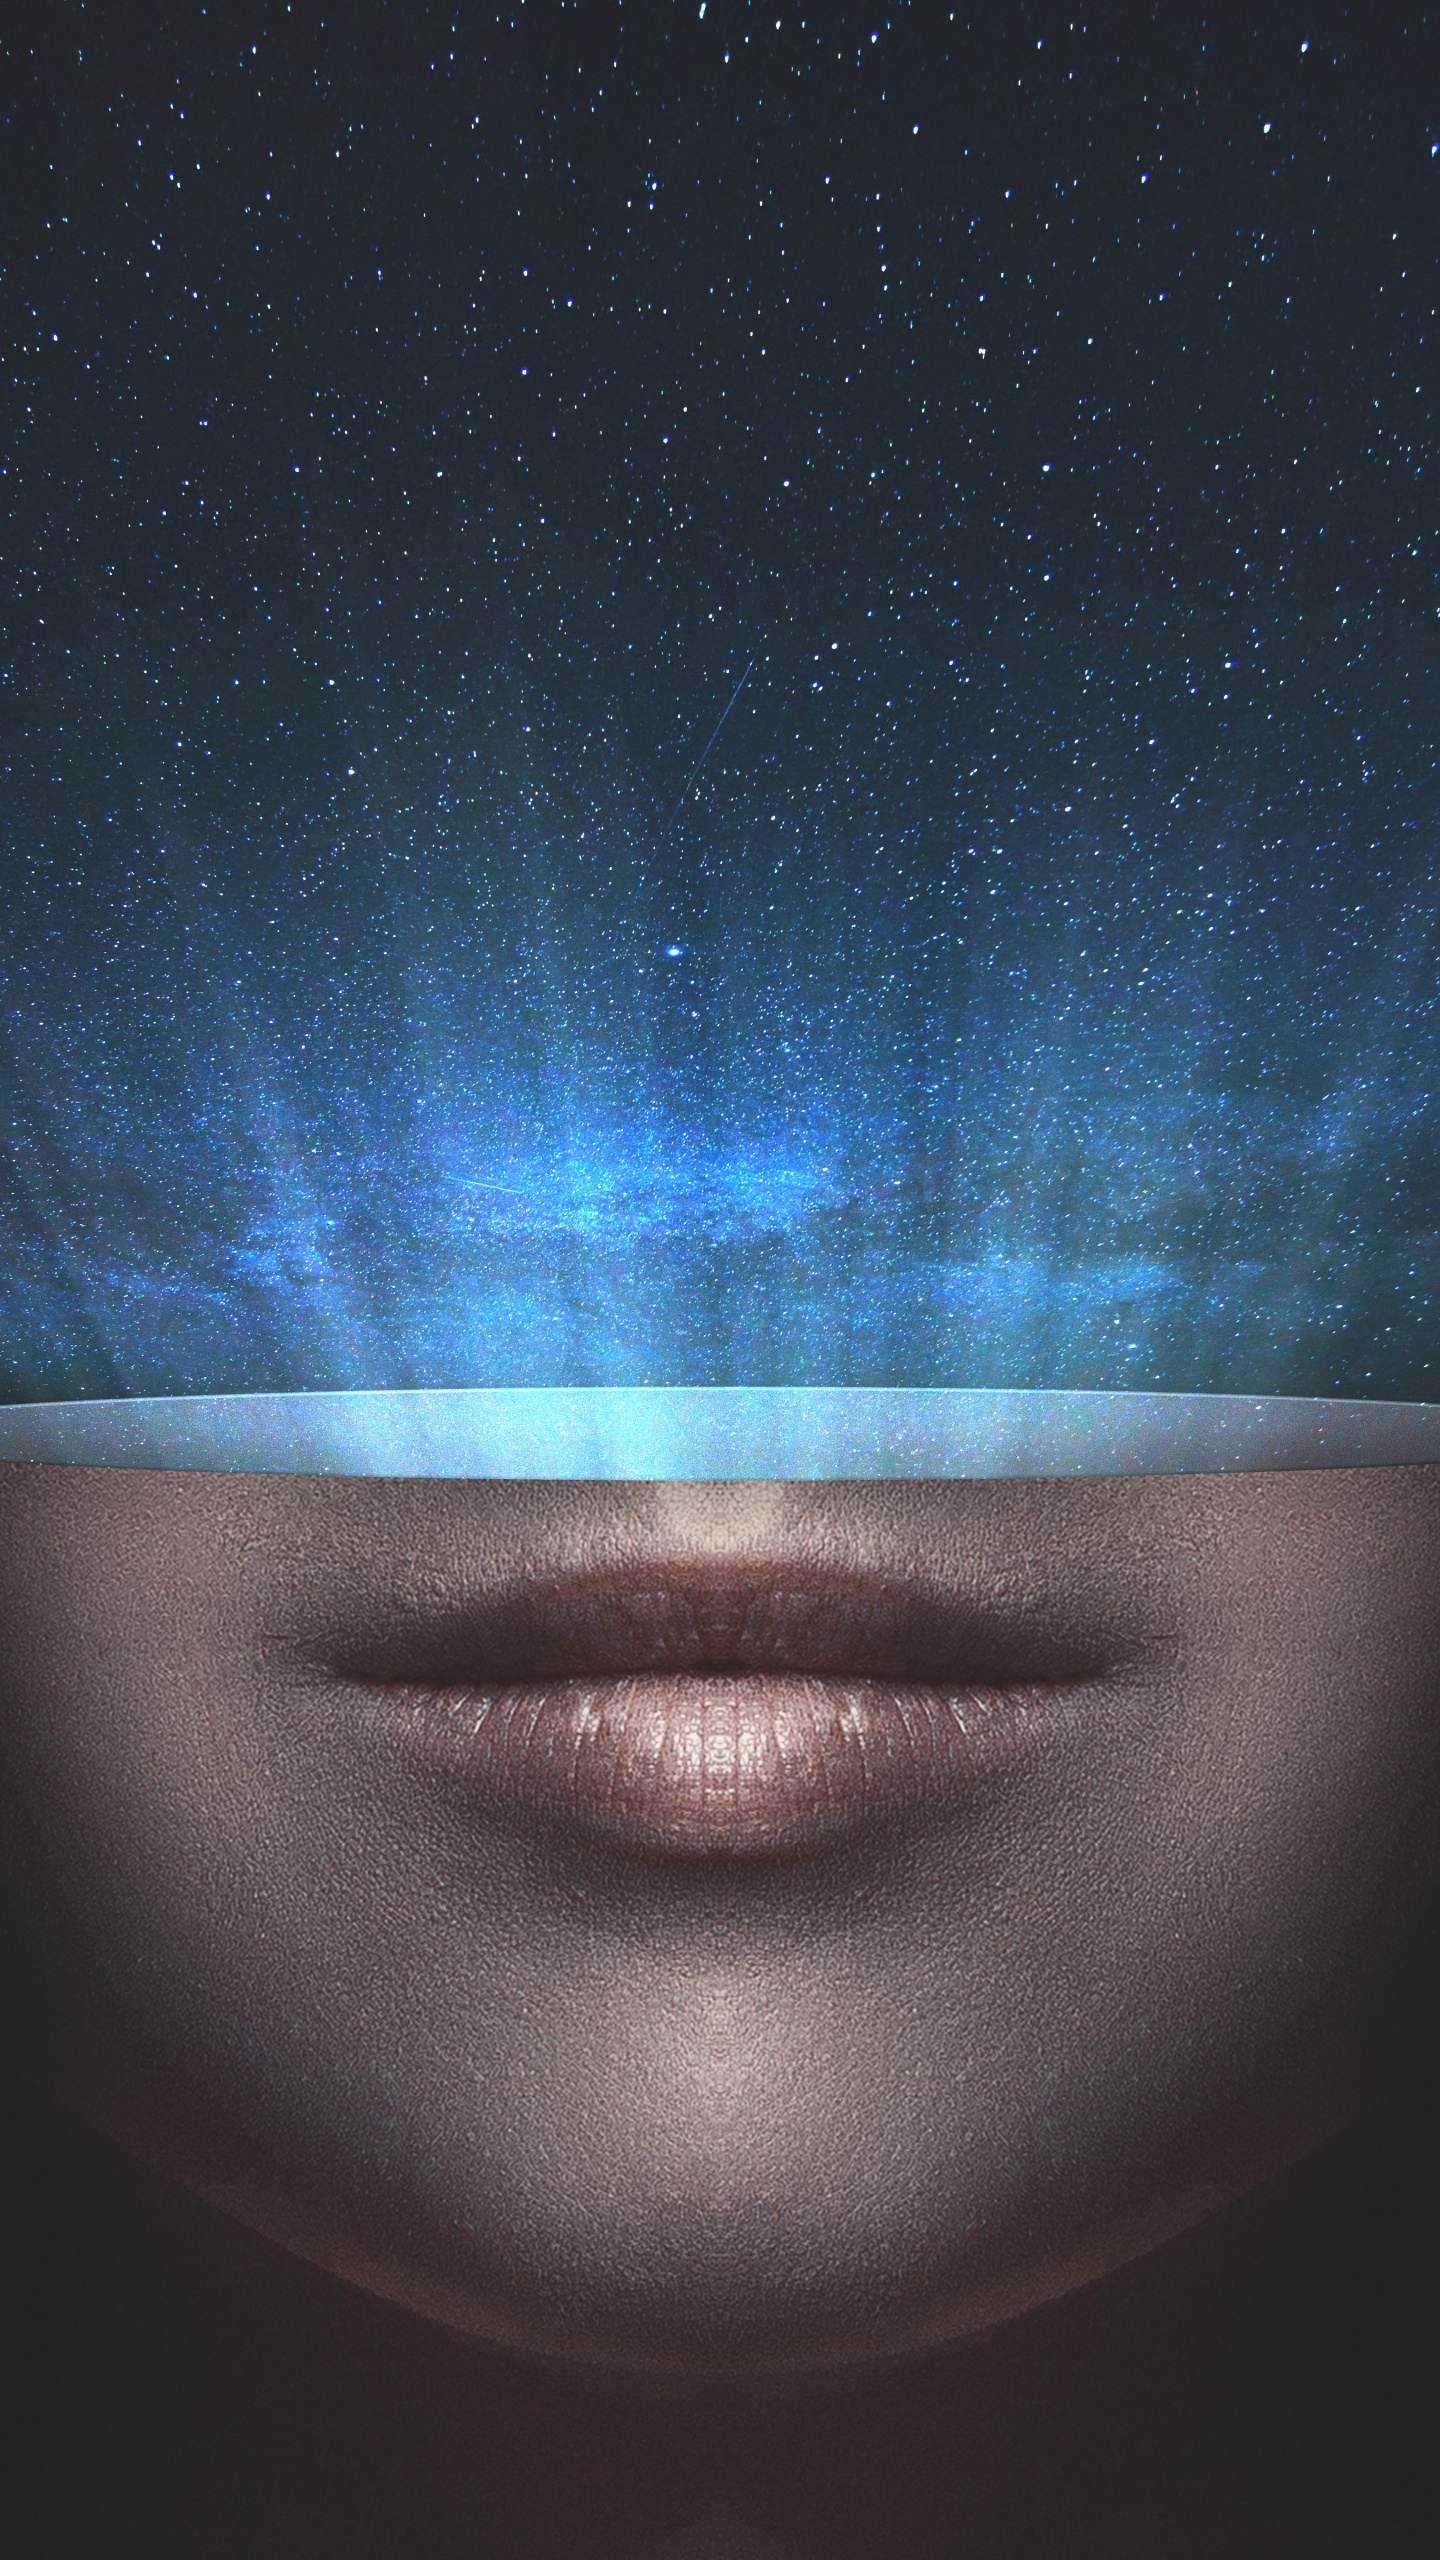 Persons Face With Blue and White Stars. Wallpaper in 1440x2560 Resolution